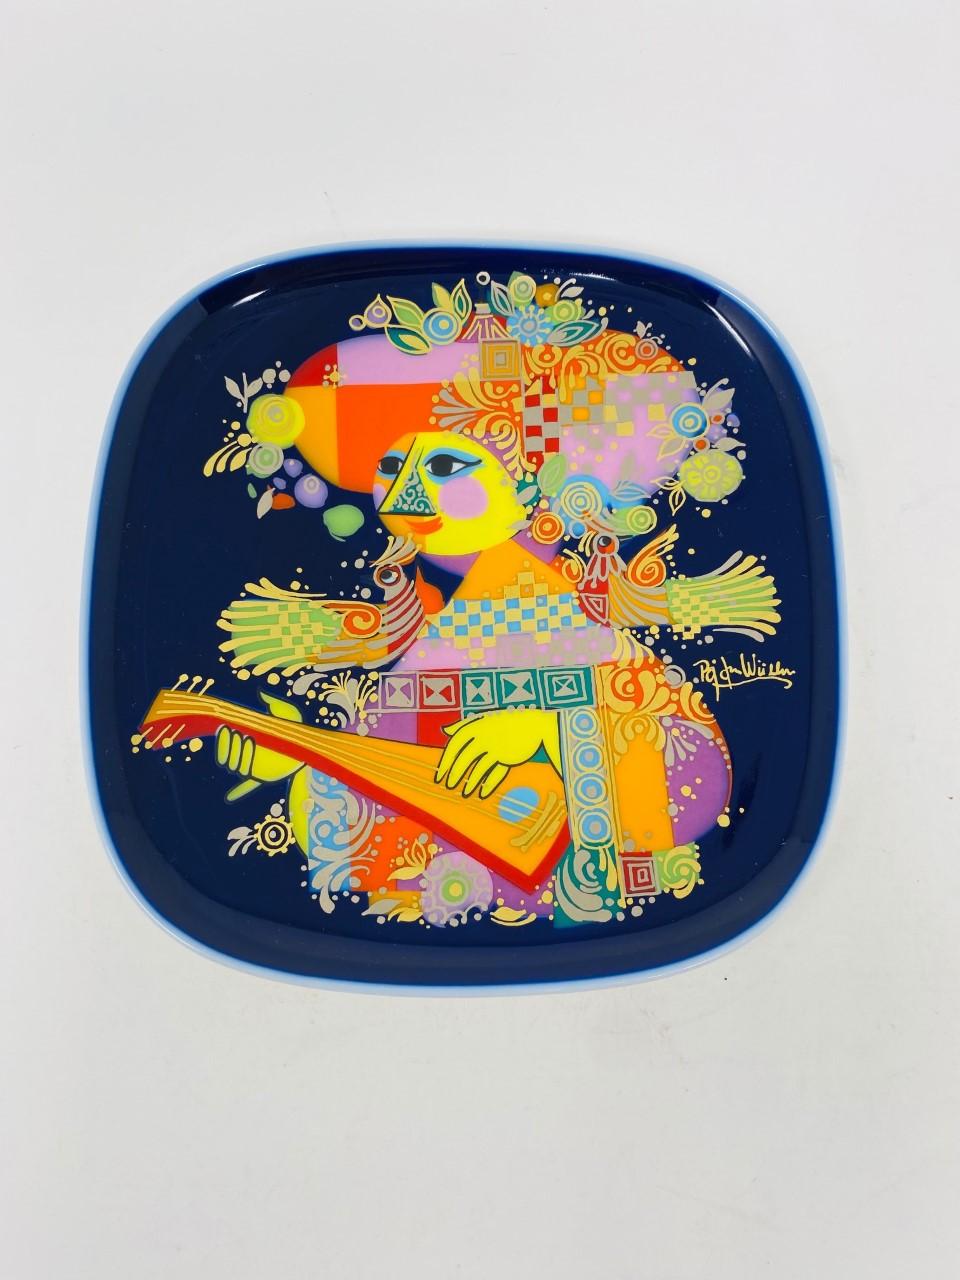 Beautiful collectible plate from the famous Danish artist Bjorn Wiinblad (Bjørn Wiinblad). The plate was designed for Rosenthal, Germany and is decorated in saturated jewel tones on a glossy cobalt blue ground with gilt highlights. The back has the